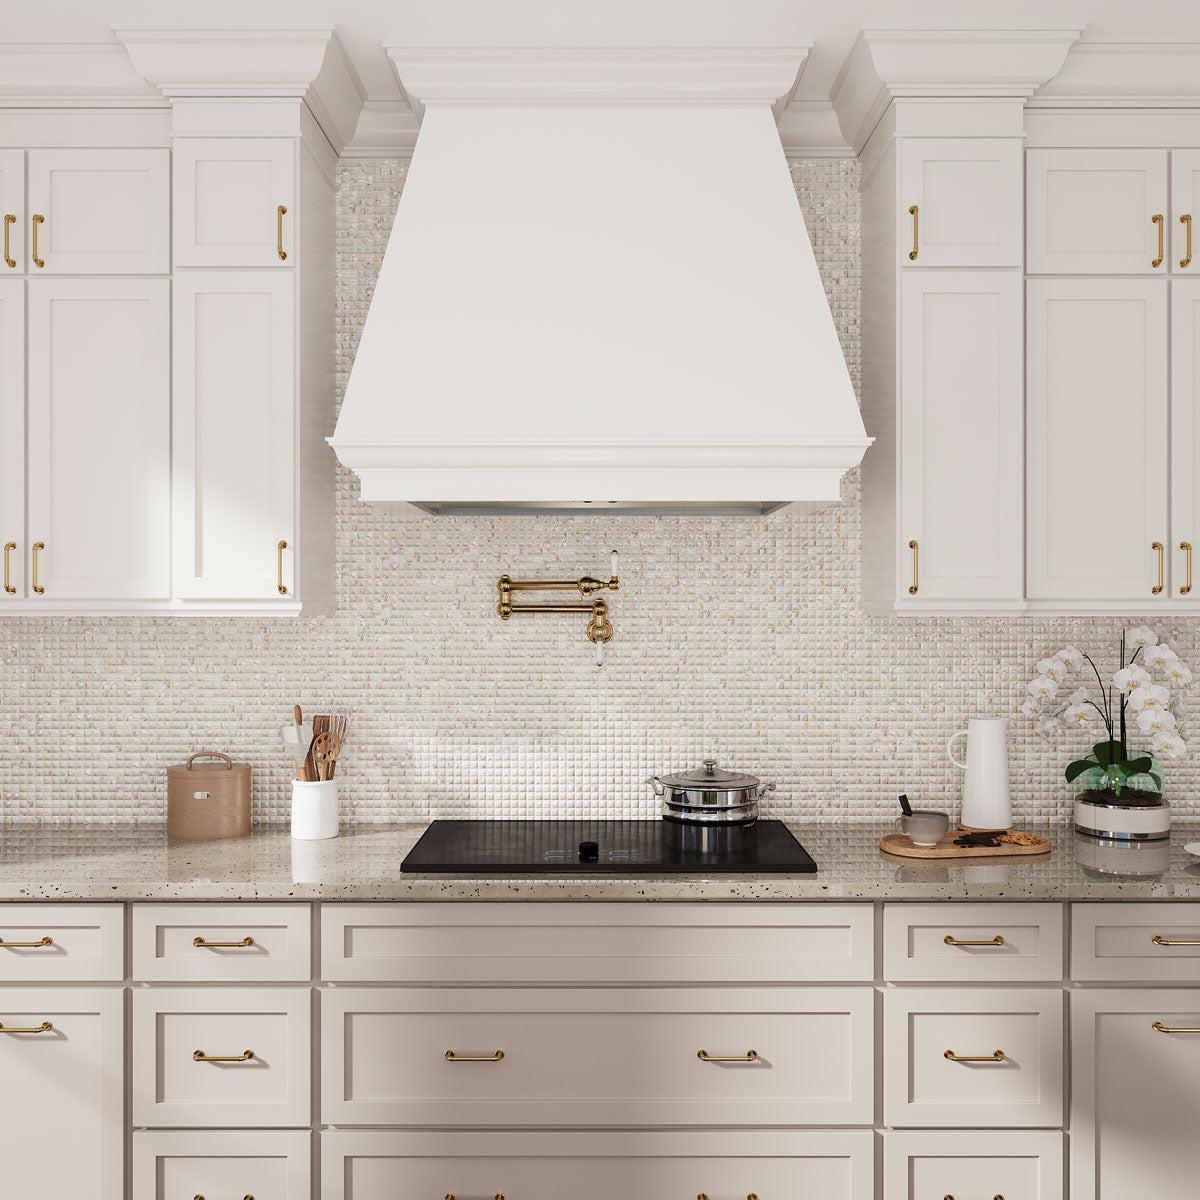 White and tan kitchen with Mother of Pearl backsplash tiles